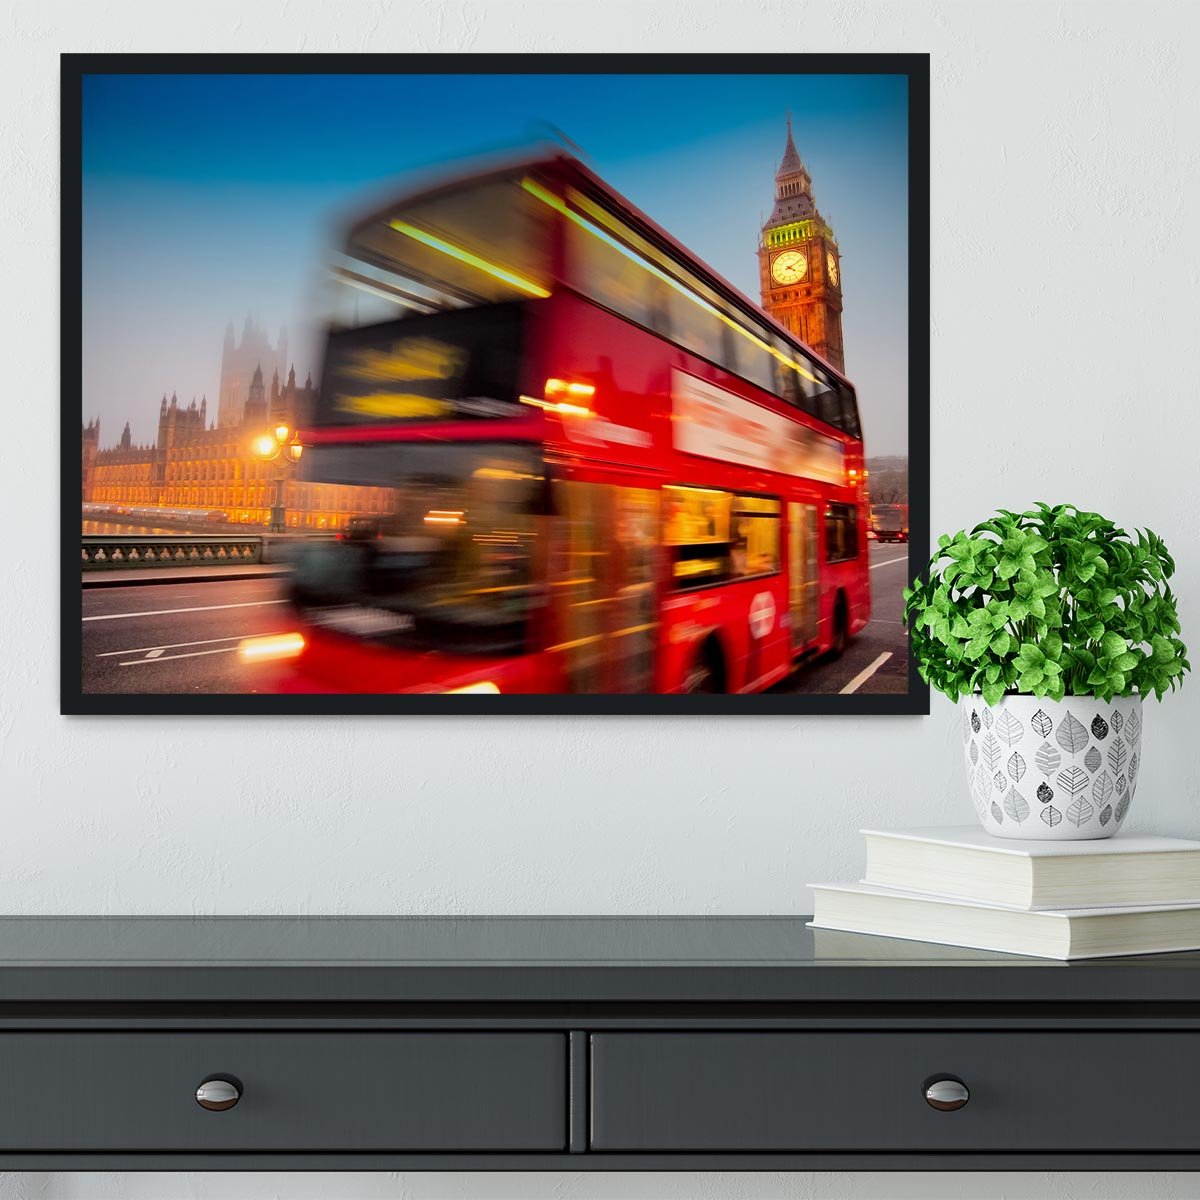 Houses Of Parliament red double-decker bus Framed Print - Canvas Art Rocks - 2